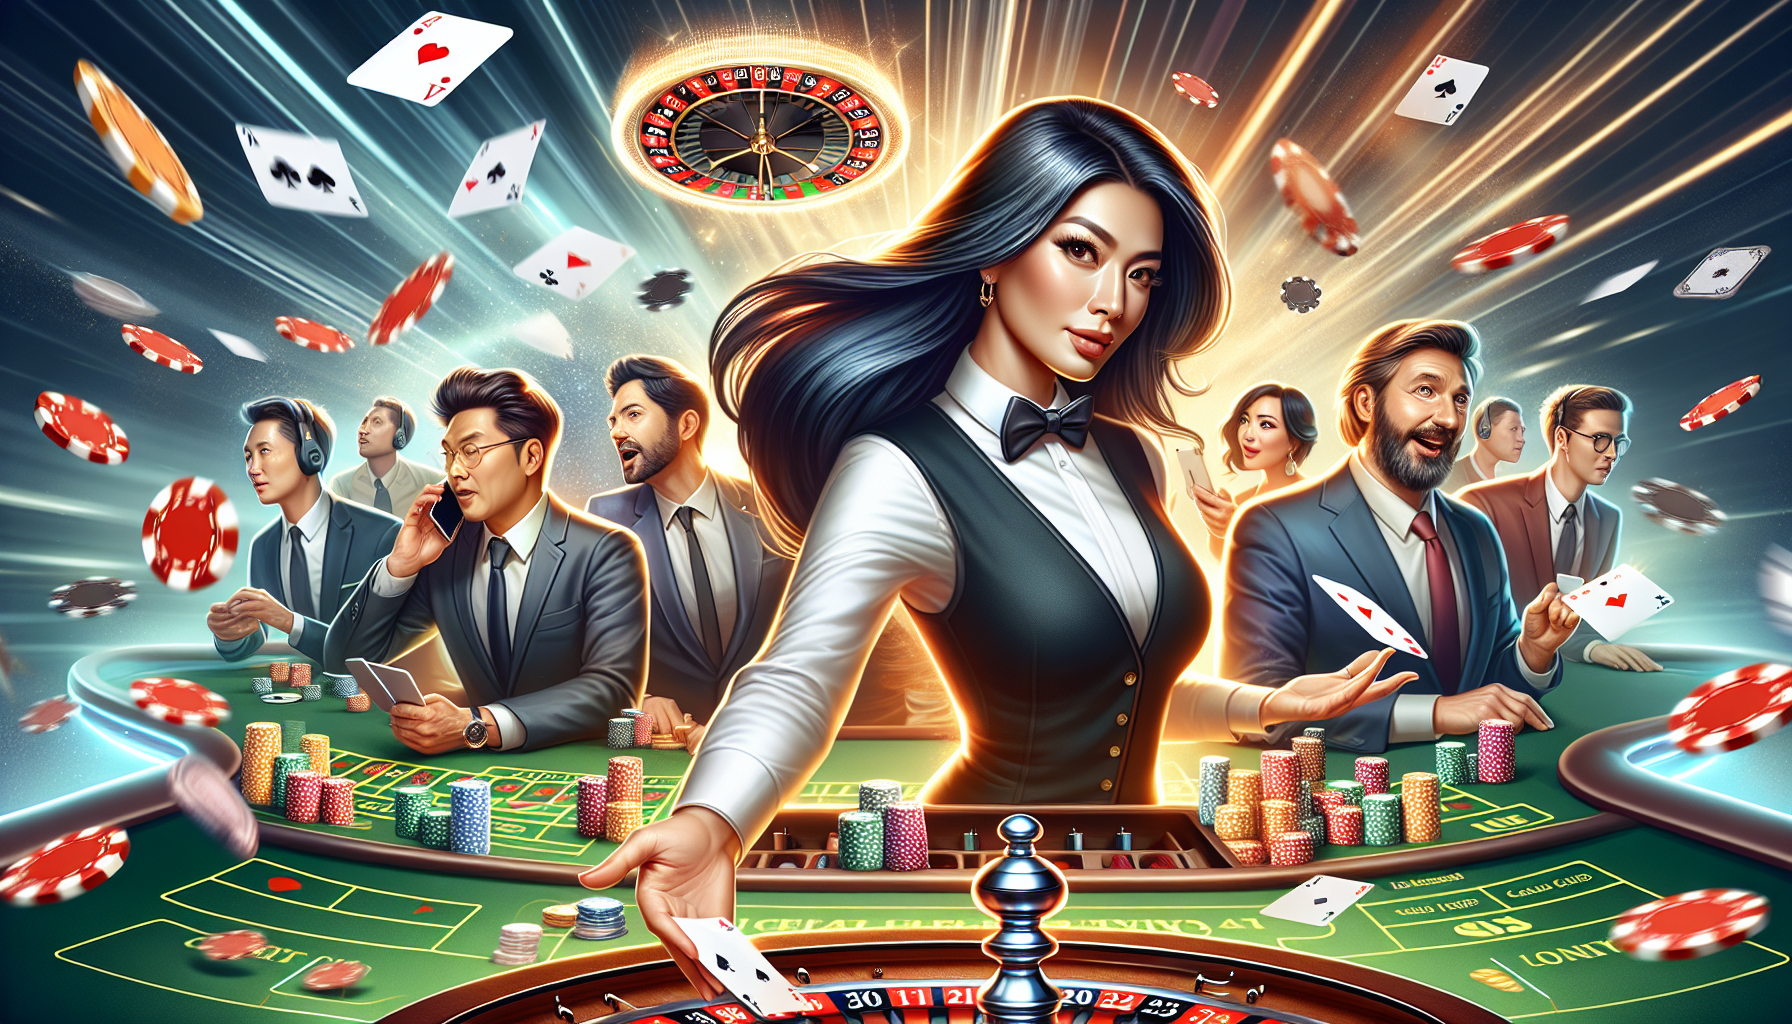 Engaging illustration of live casino action